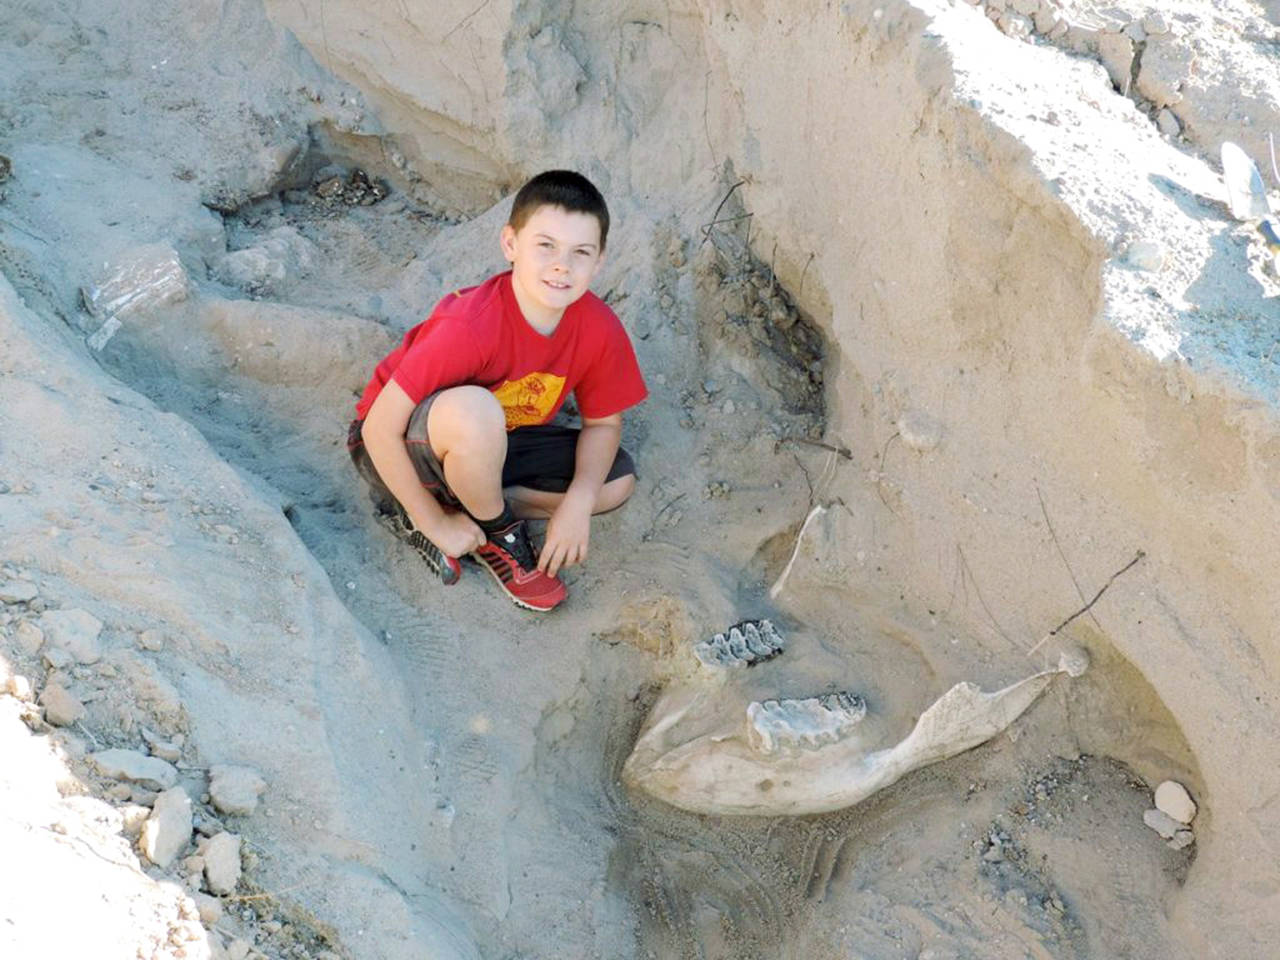 Jude Sparks poses with the Stegomastodon fossil he stumbled across near Las Cruces, New Mexico. (Peter Houde / New Mexico State University)